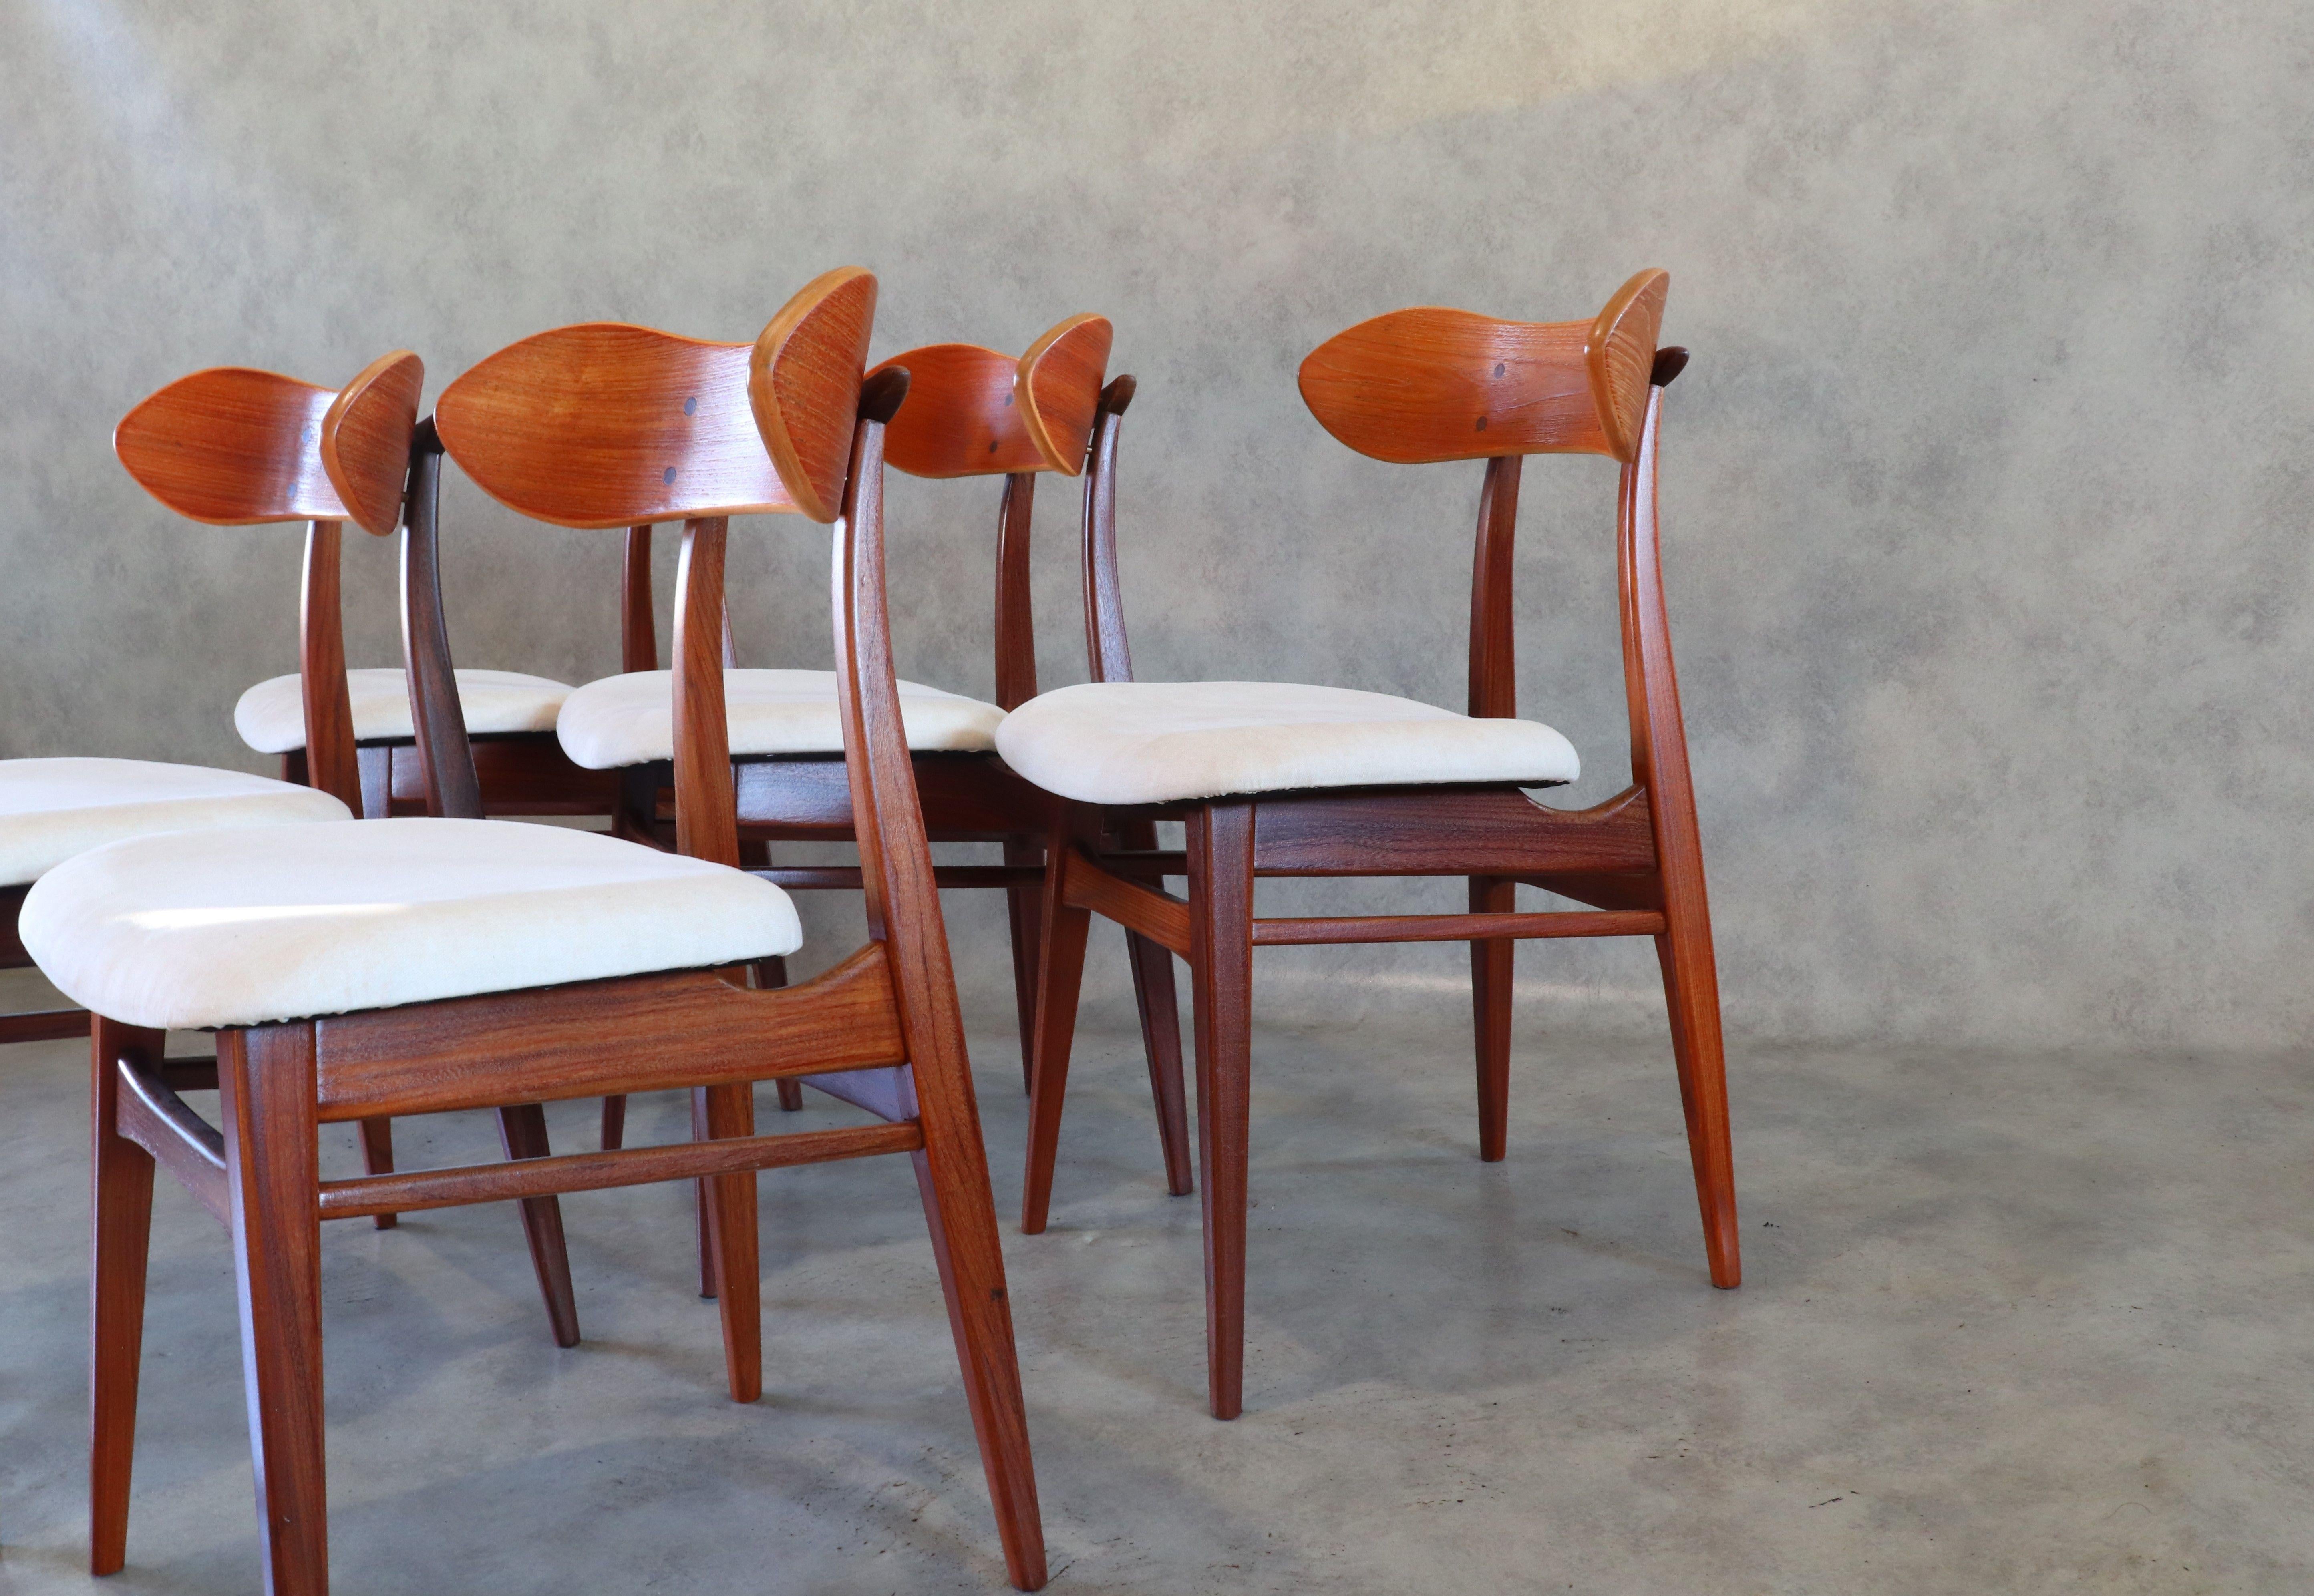 Fabric 20th Century Reupholstered Teak Dining Chairs by Louis Van Teeffelen for Webe